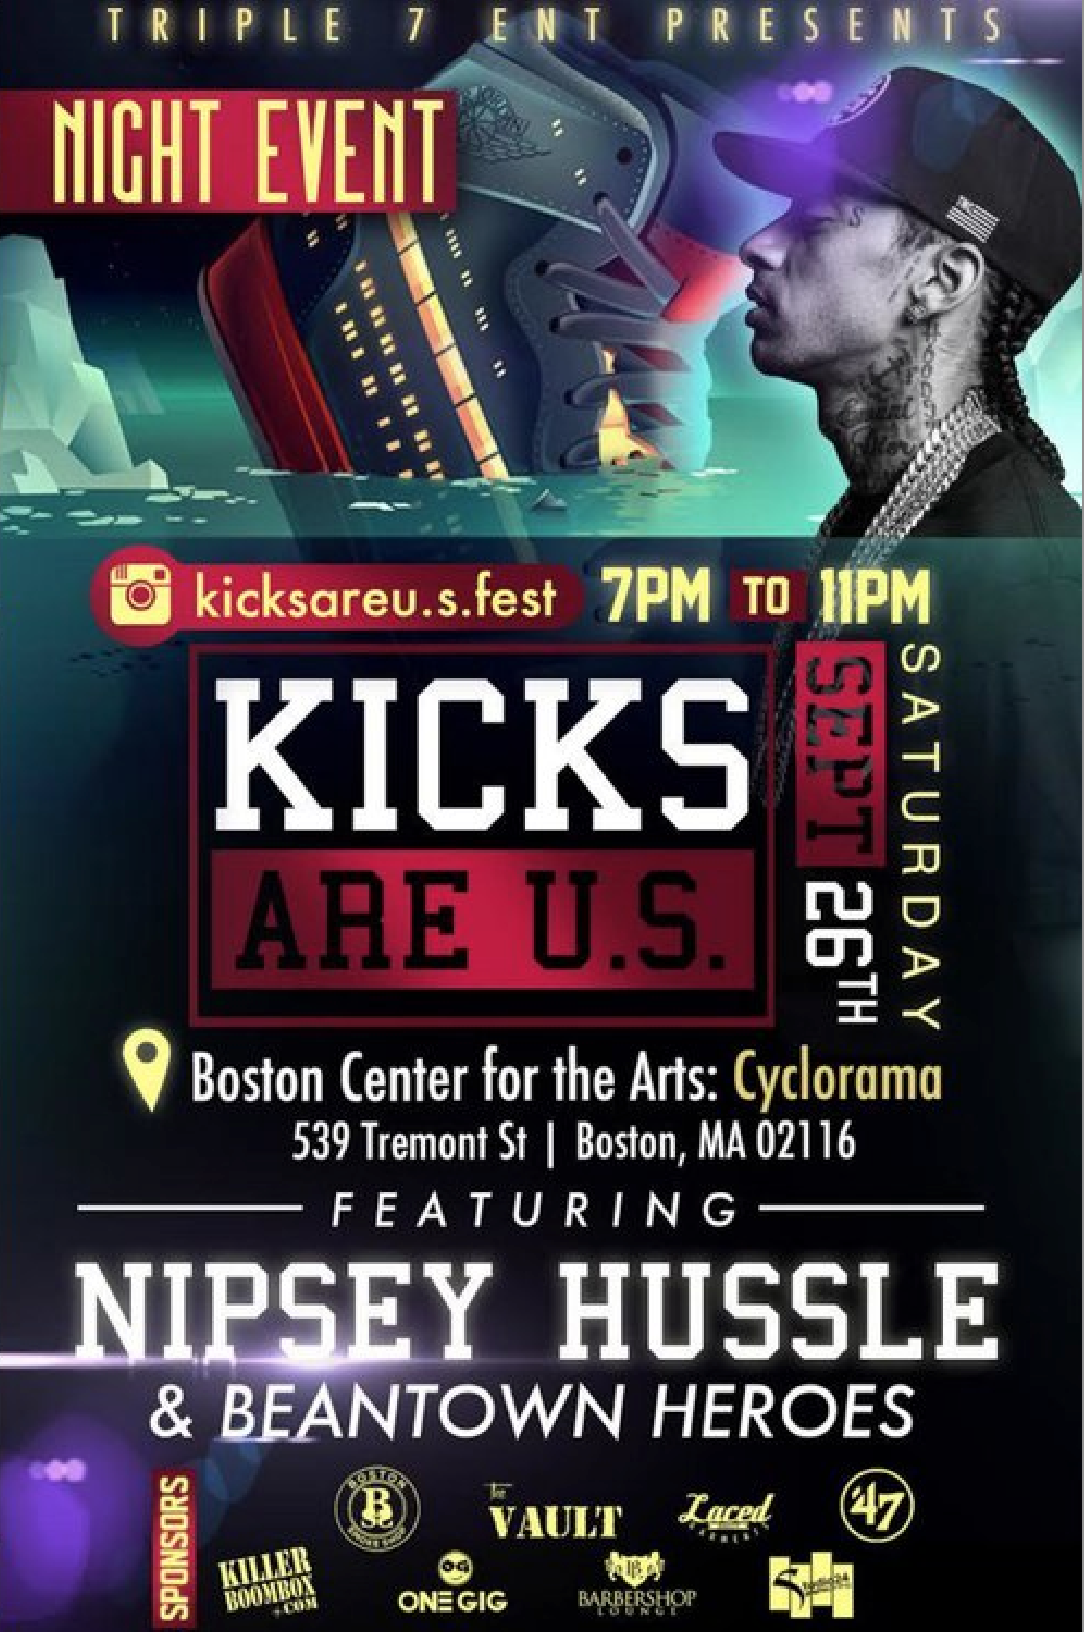 http://www.eventbrite.com/e/sneaker-music-festival-presented-by-kicks-are-us-nipsey-hussle-live-tickets-18011225059?aff=ehomecard